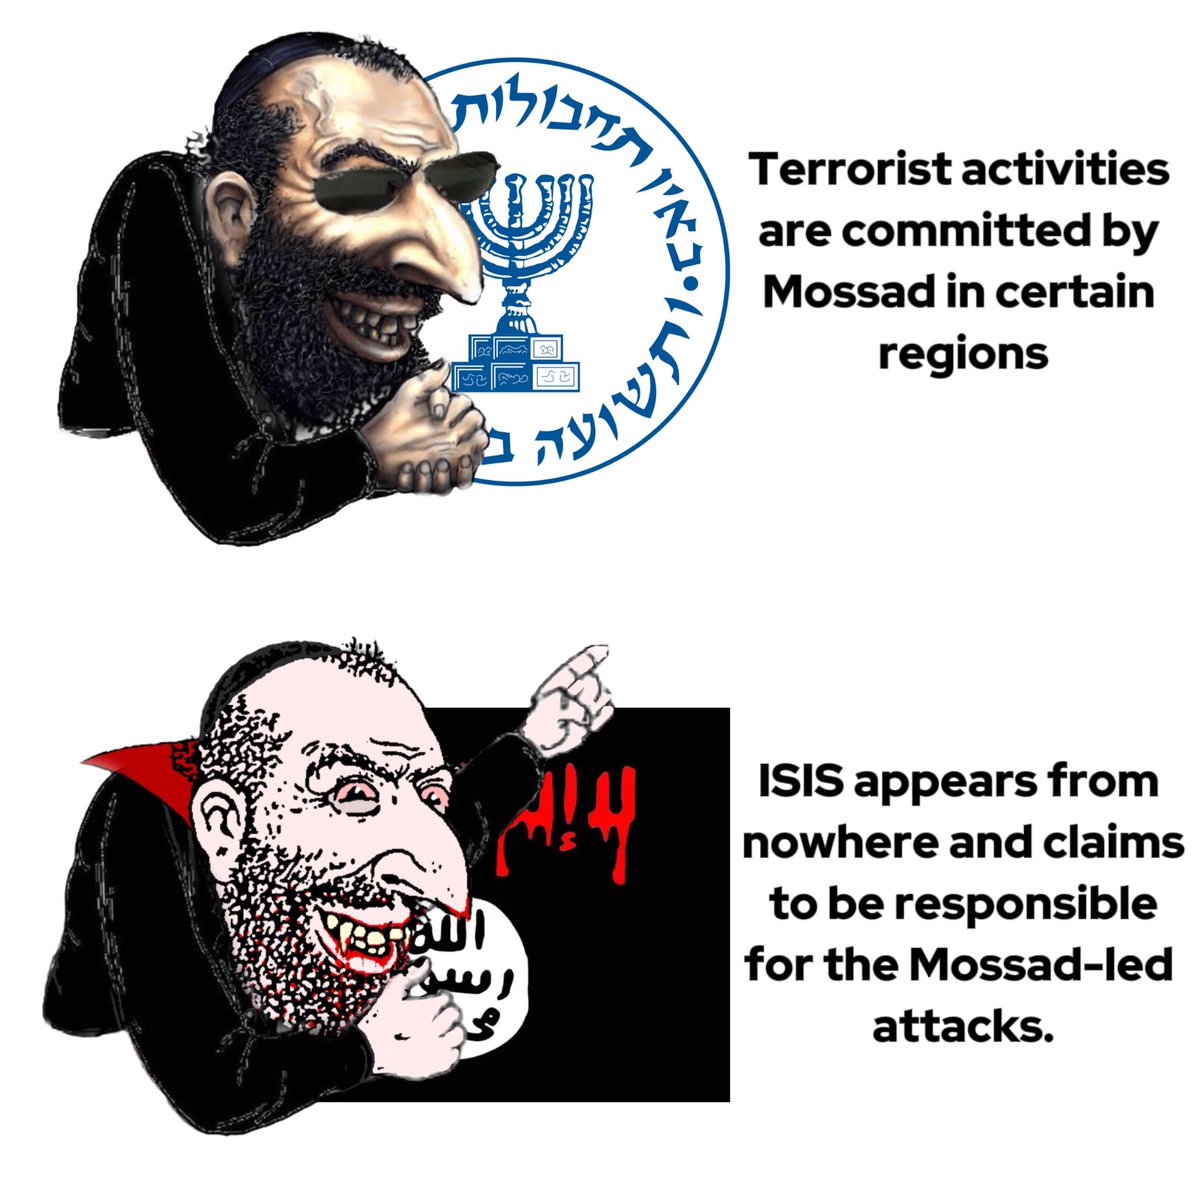 The Mossad has ISIS's backing.